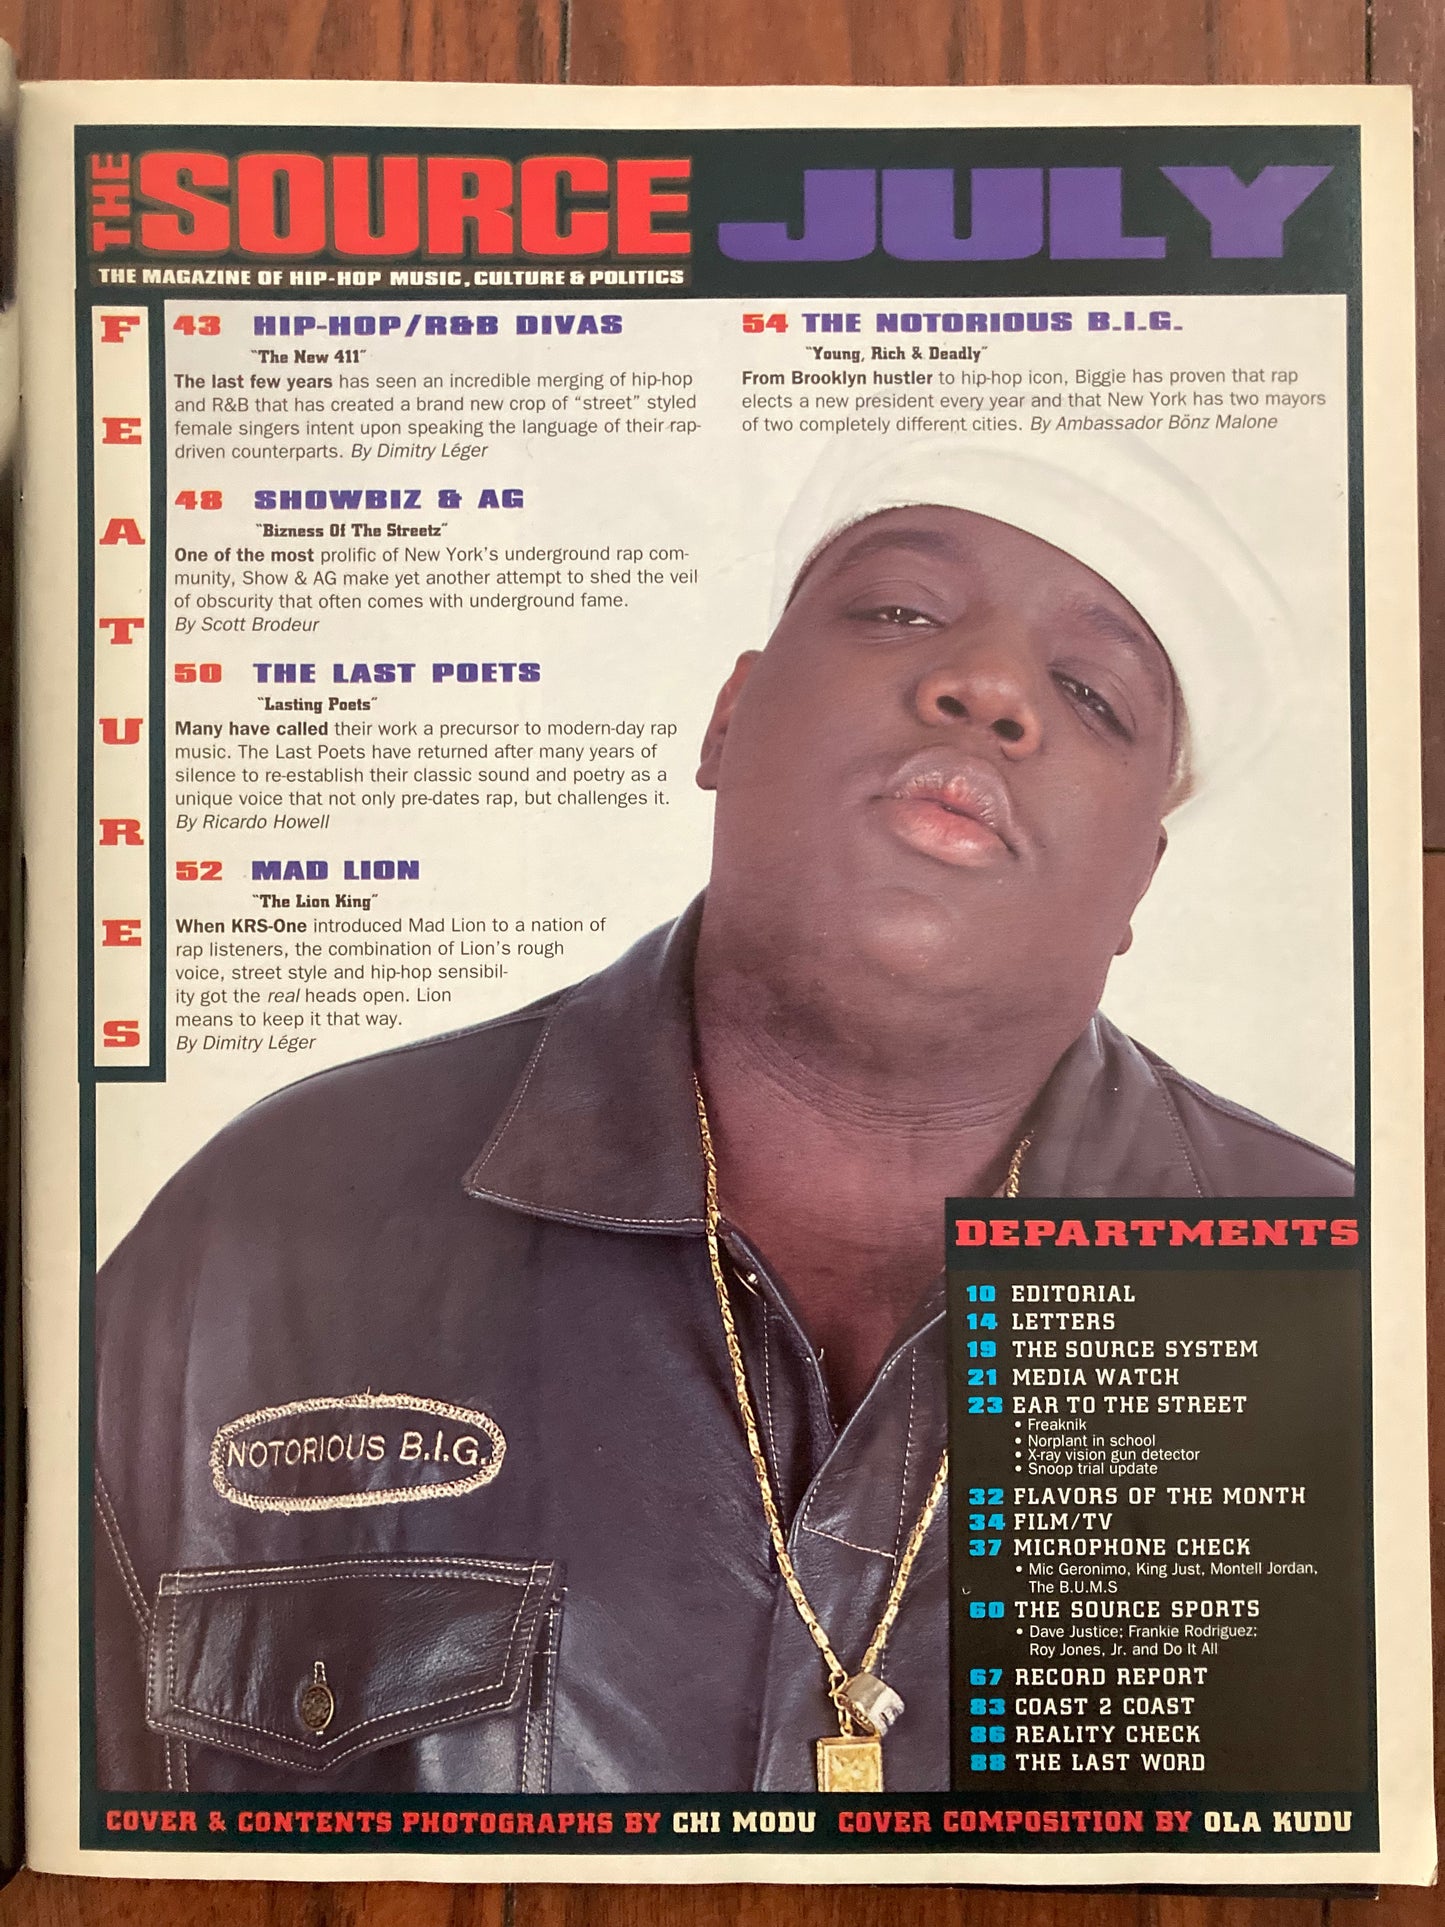 The Source Magazine July 1995 Notorious B.I.G. - MoSneaks Shop Online